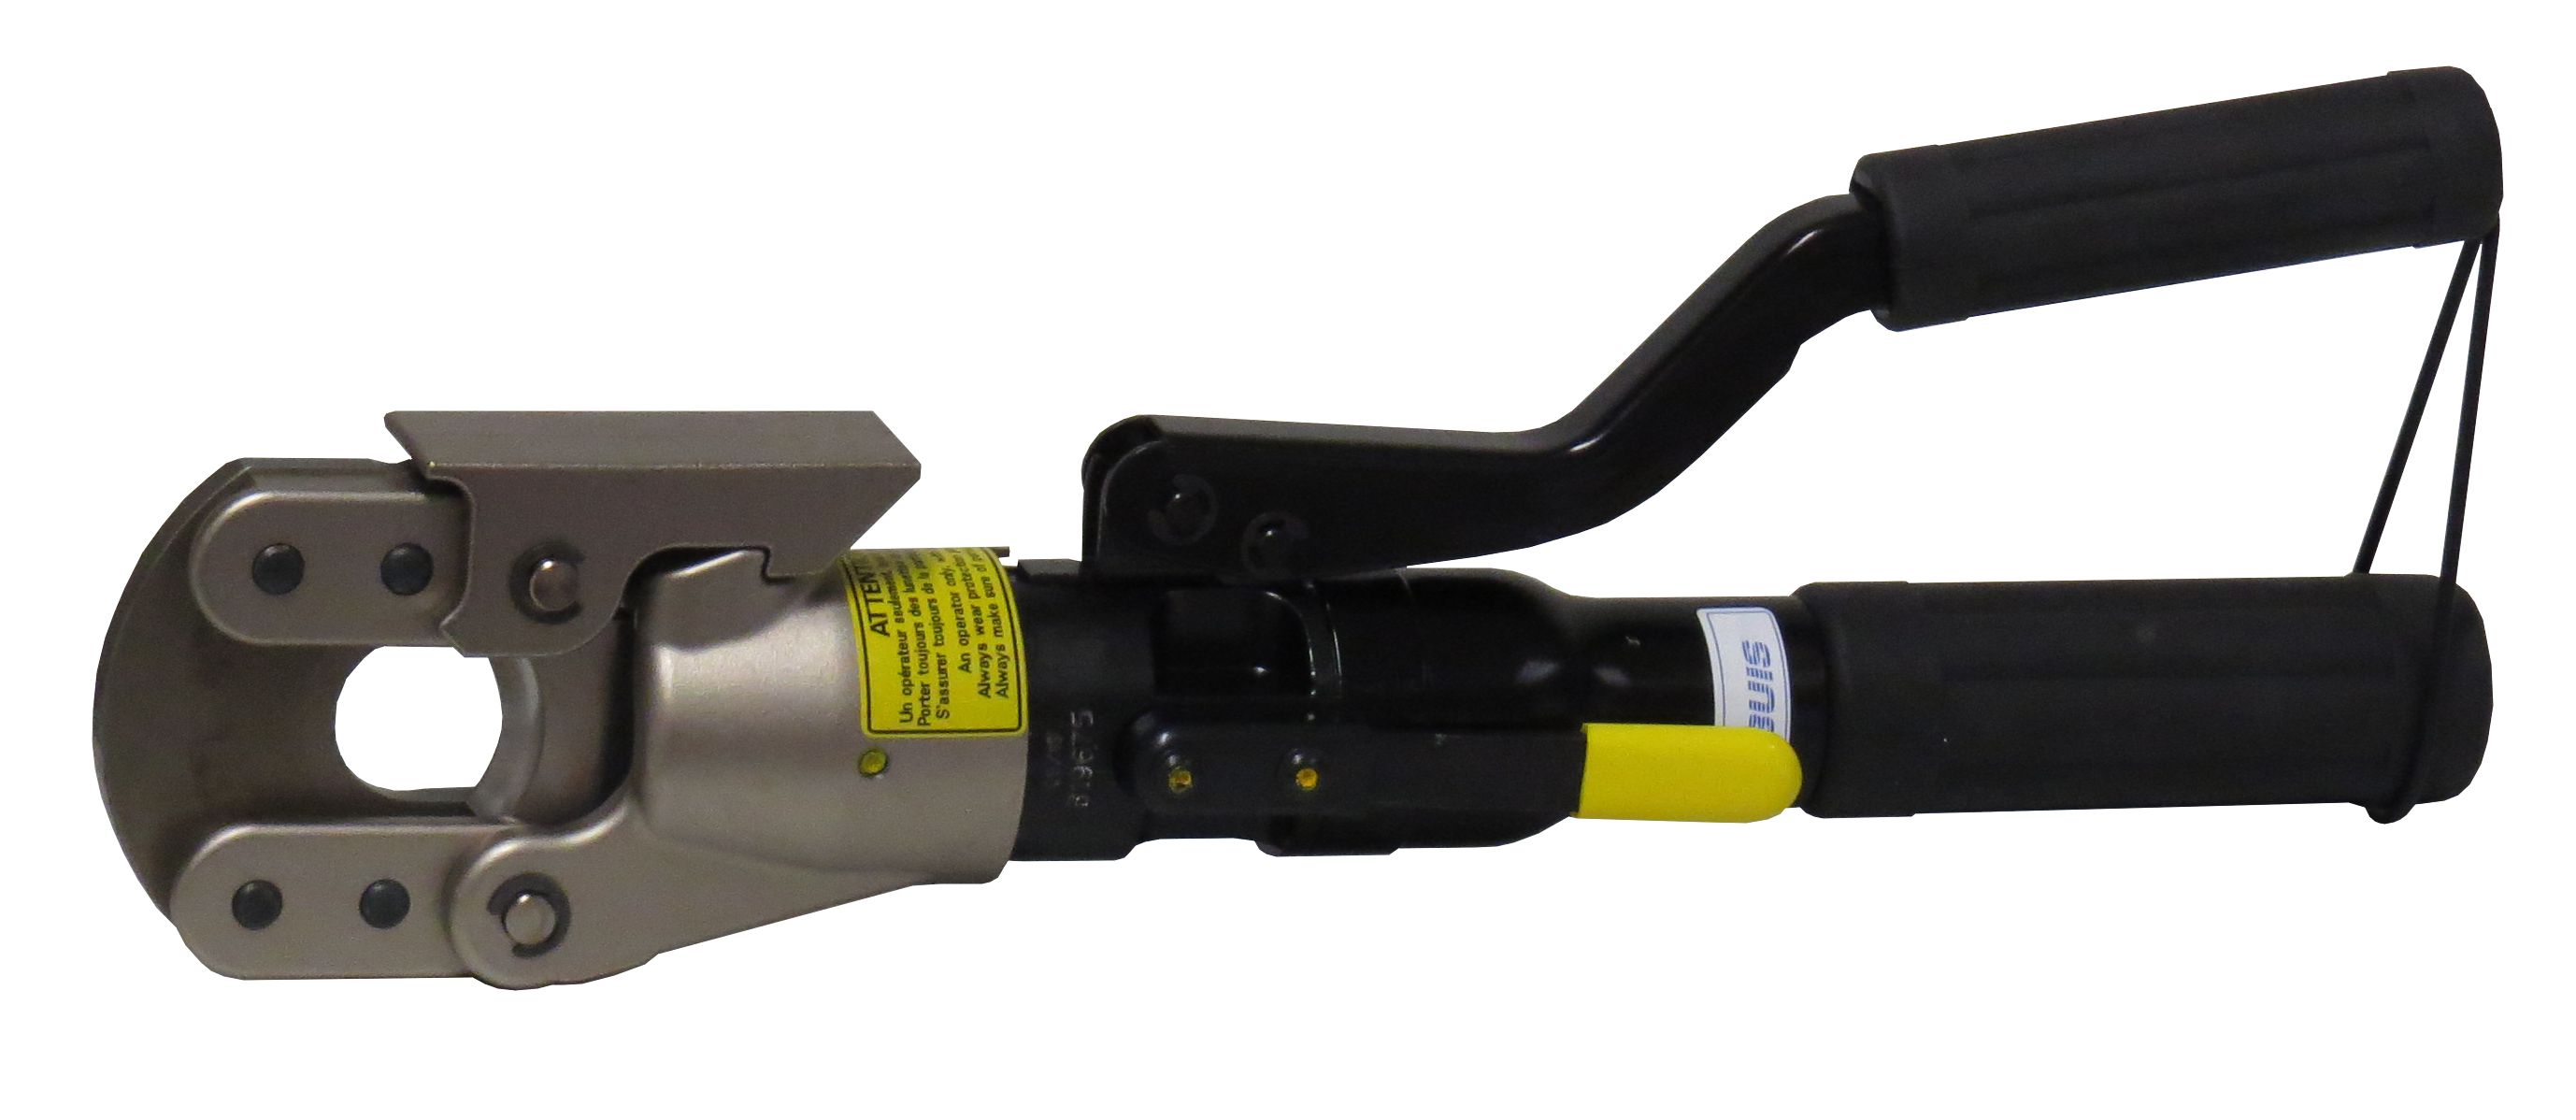 HS25G - Hand hydraulic cable cutter for aluminum-steel ropes (ACSR) - D = 25mm